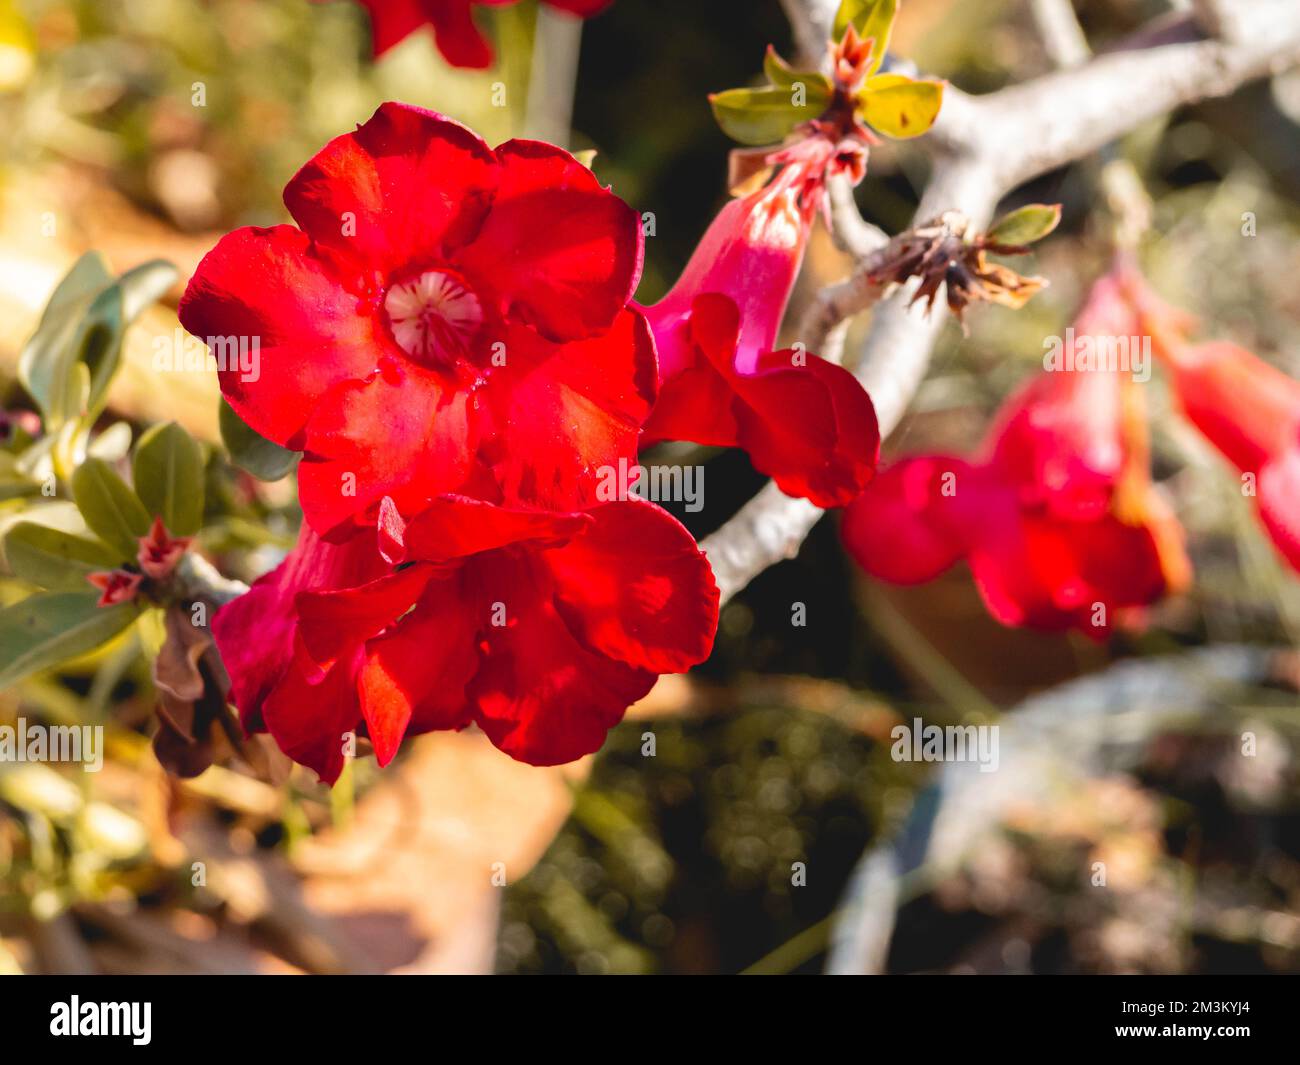 A bunch of red flowers and leaves Stock Photo